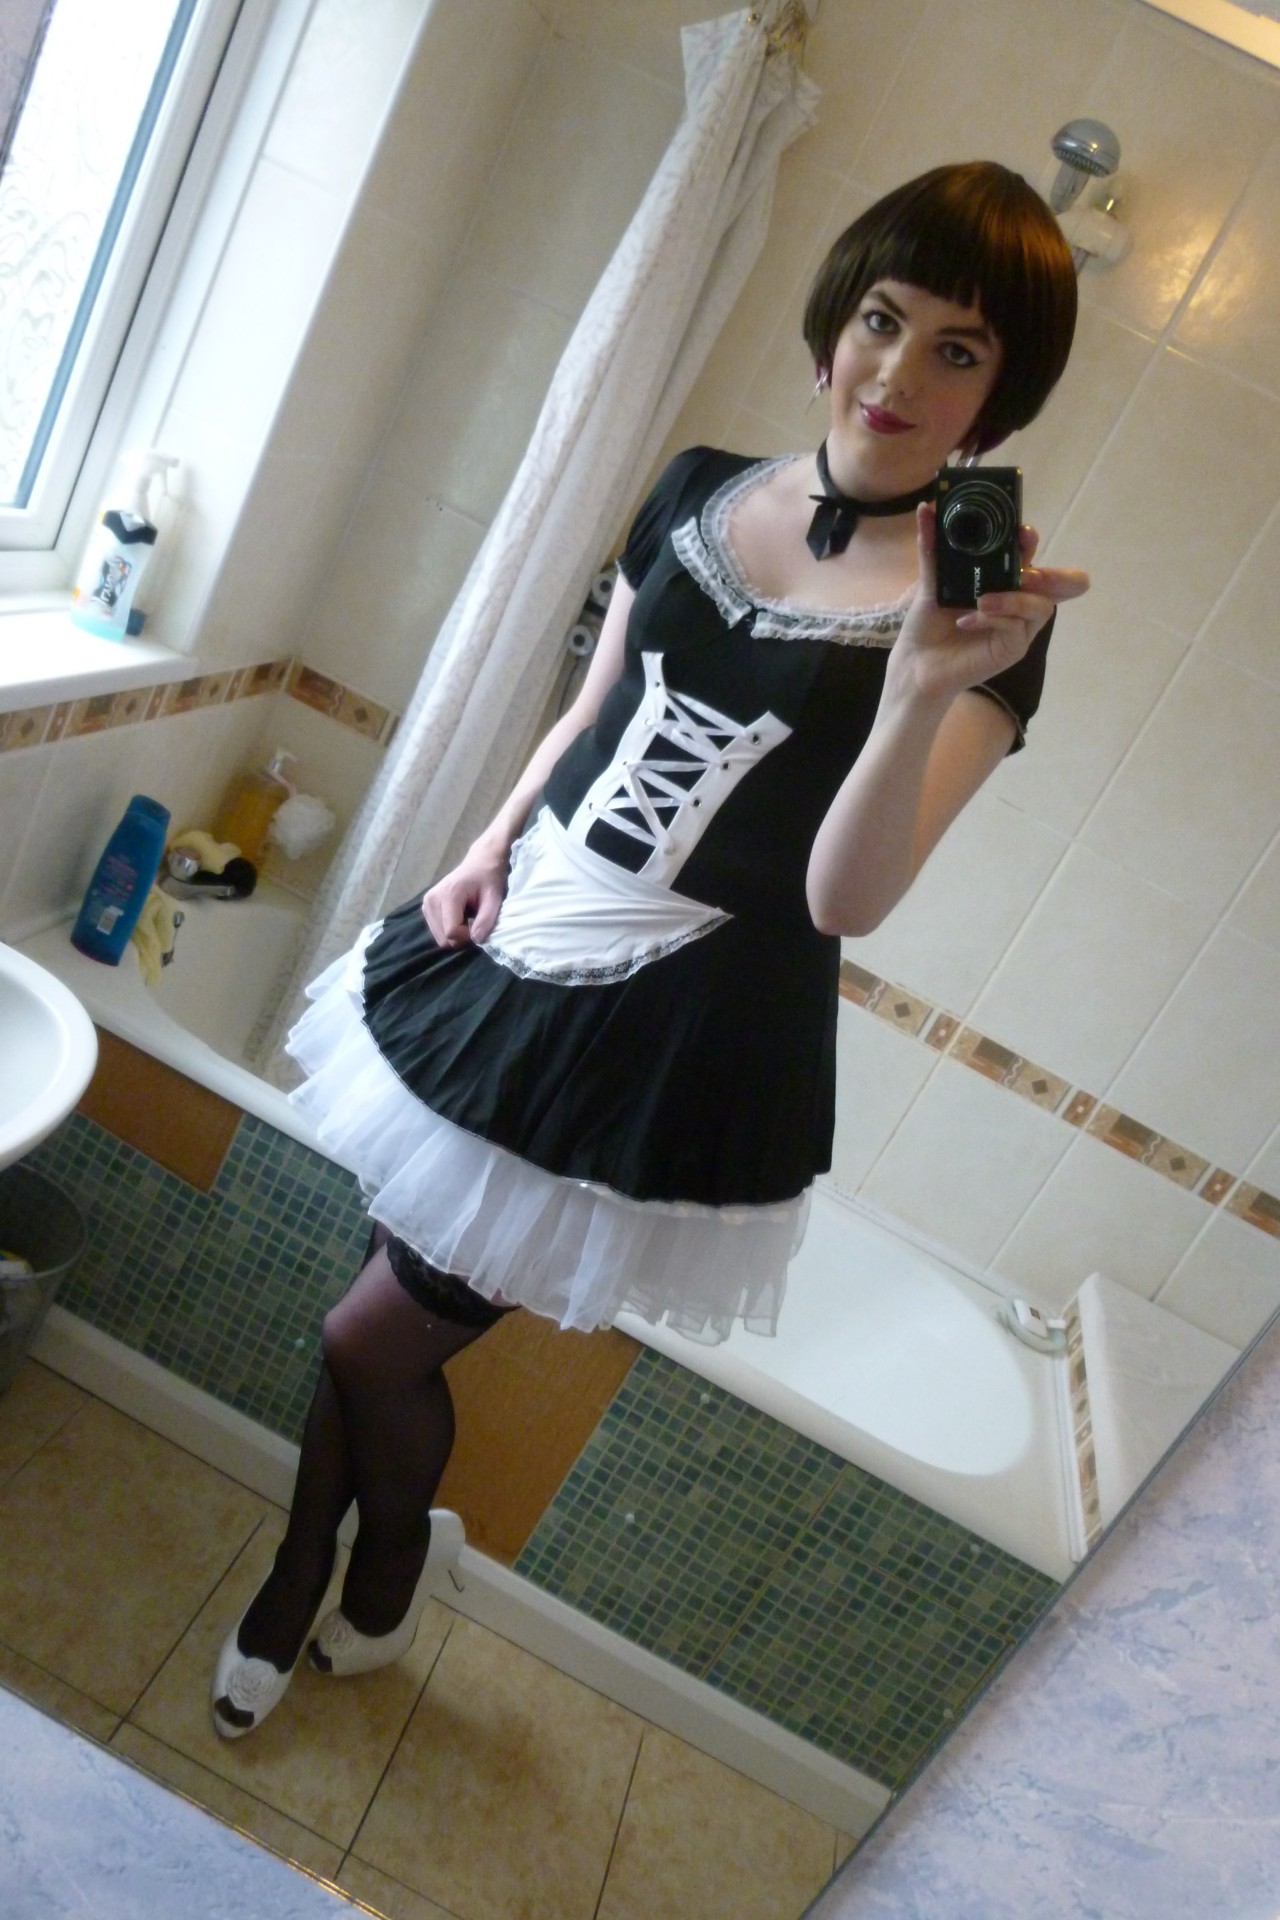 Maid sees dick lovely image